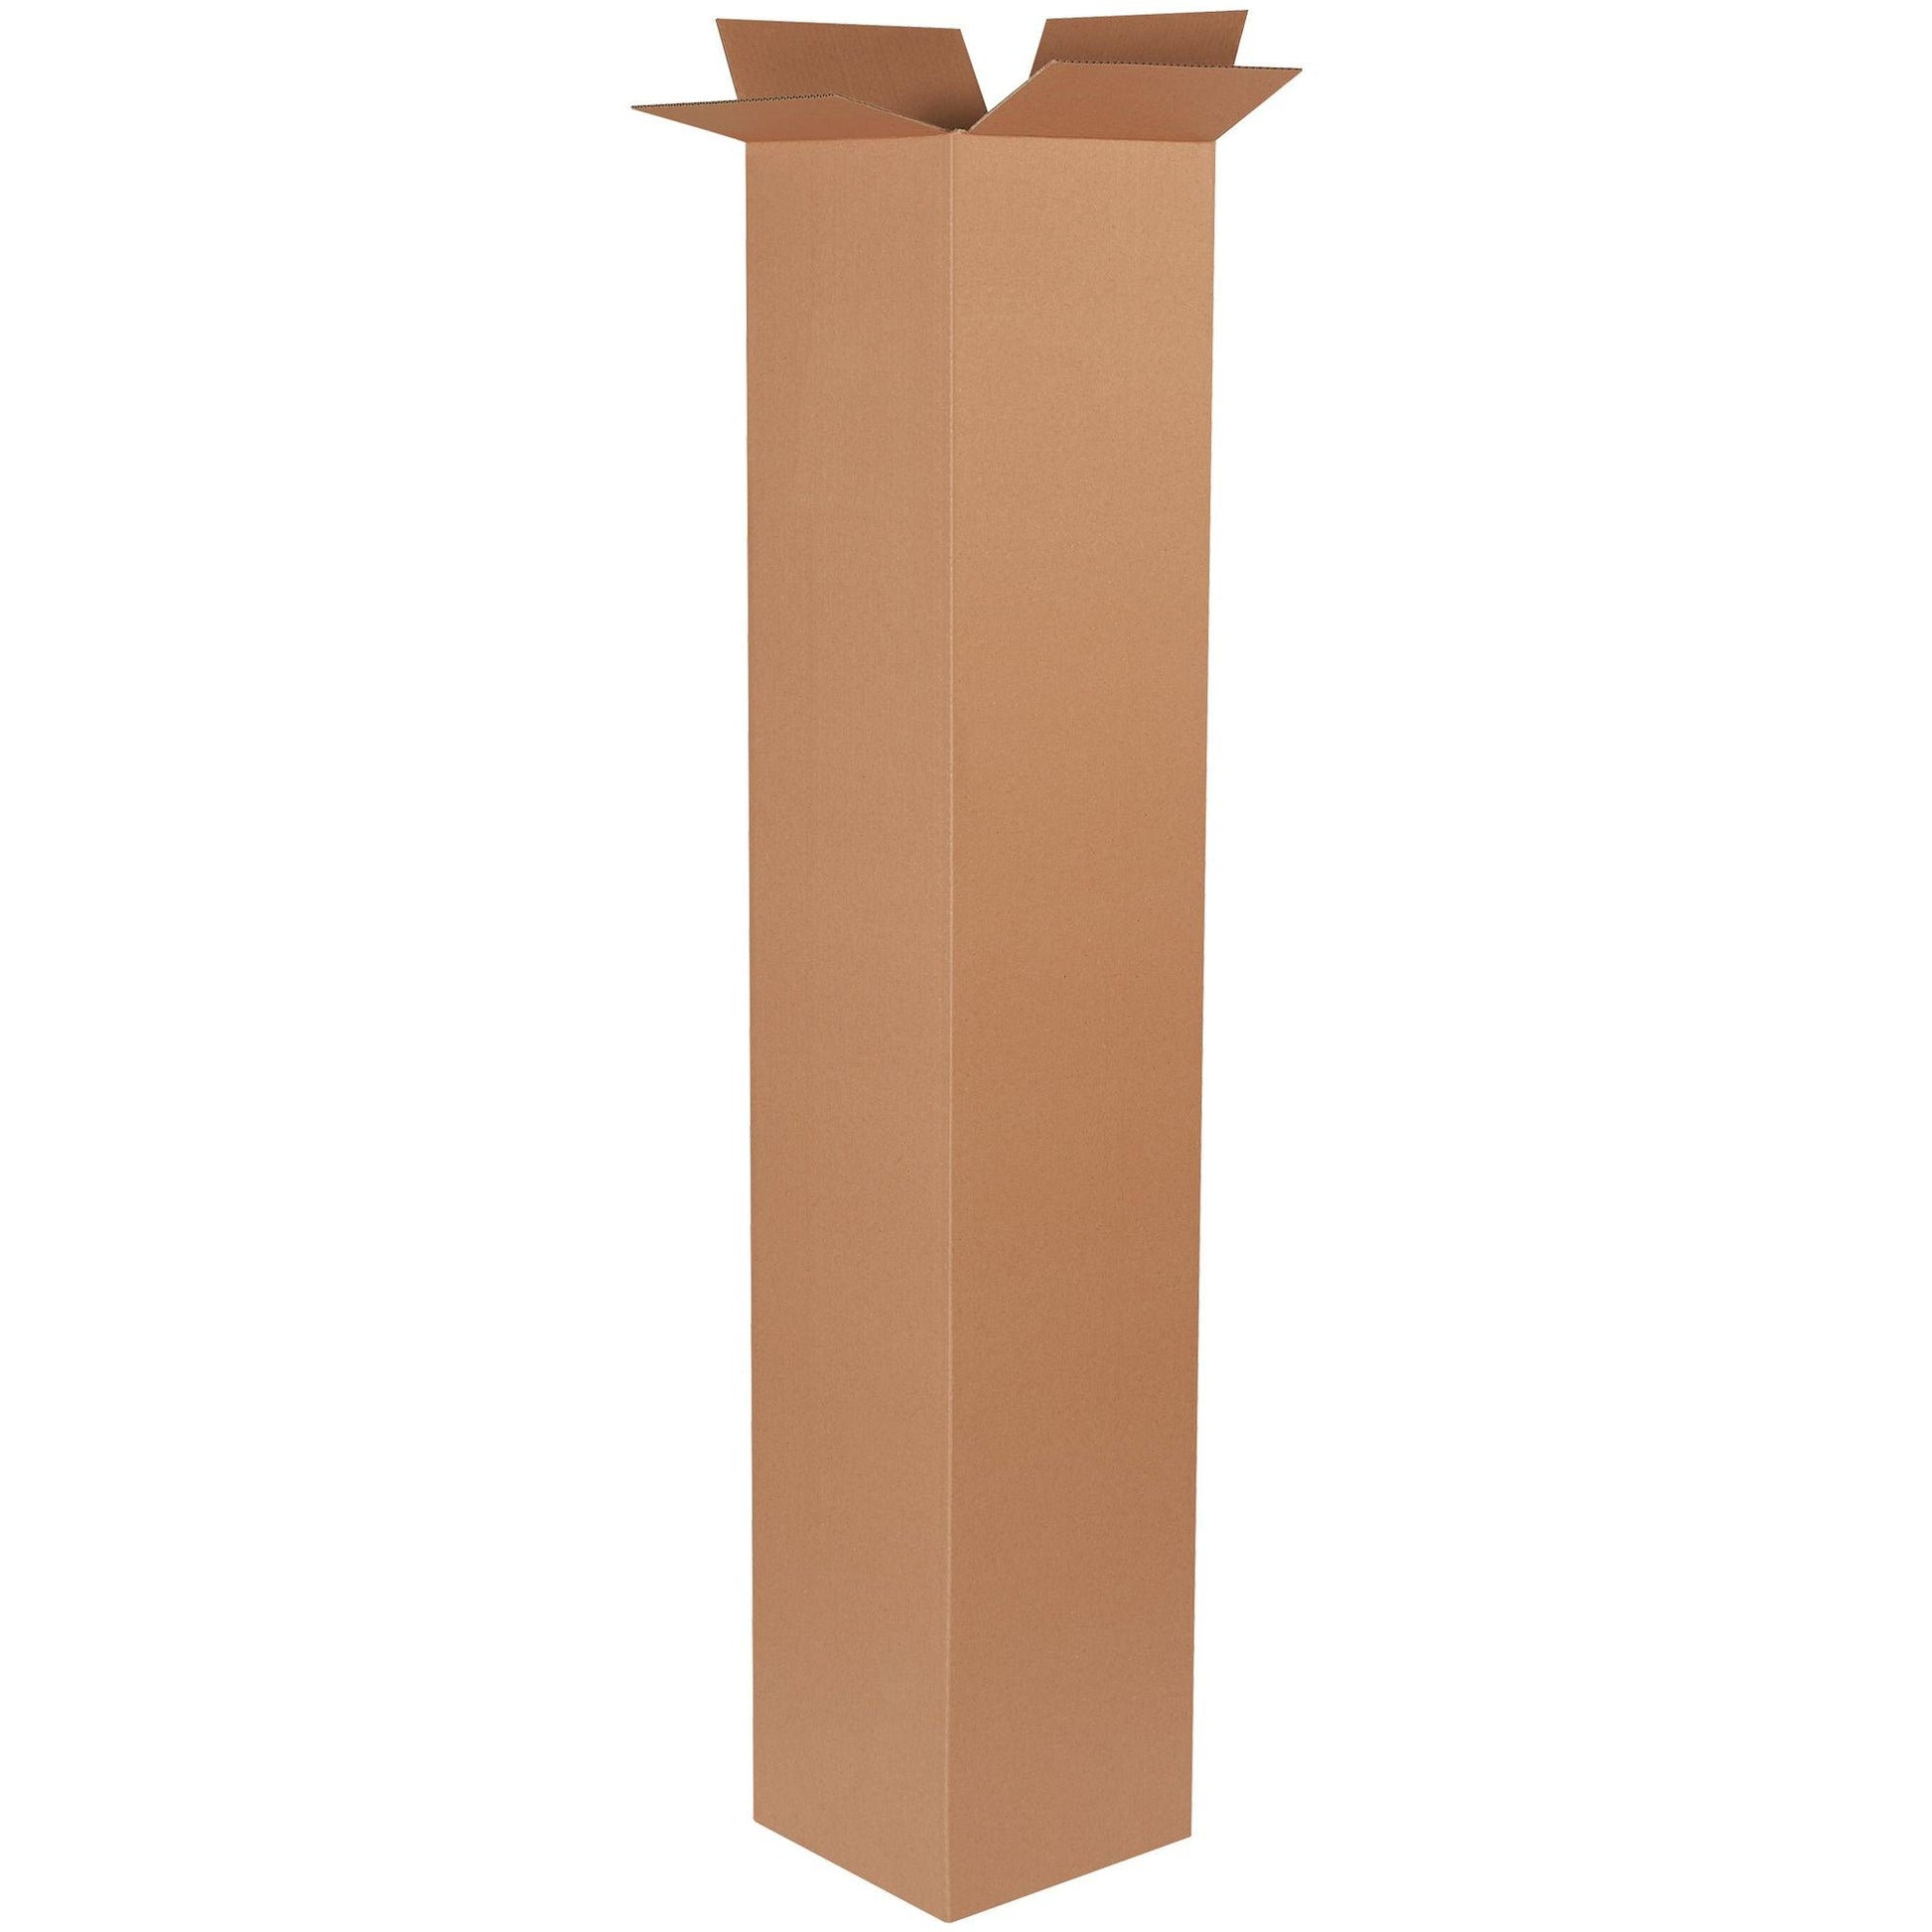 10 x 10 x 72" Tall Corrugated Boxes - 101072